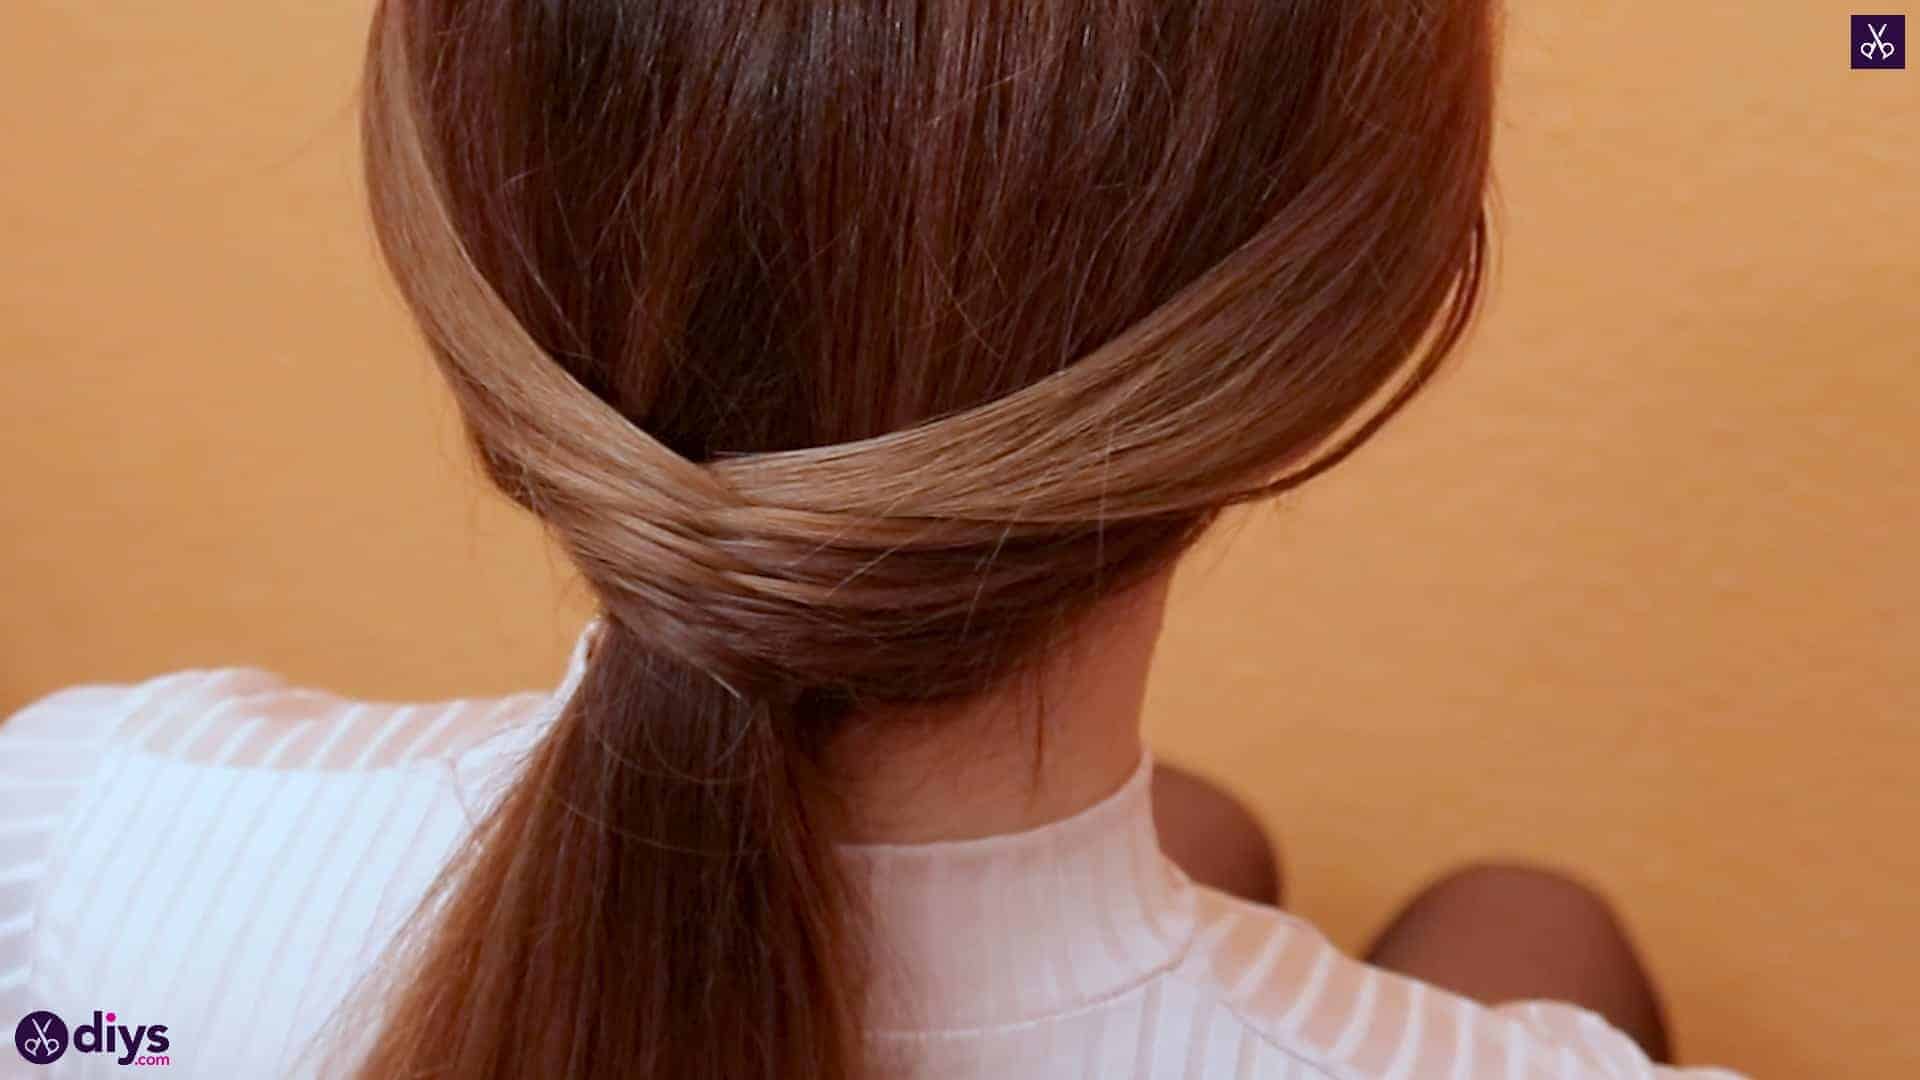 10 Beginner Hairstyle Video Tutorials To Experiment With At Home